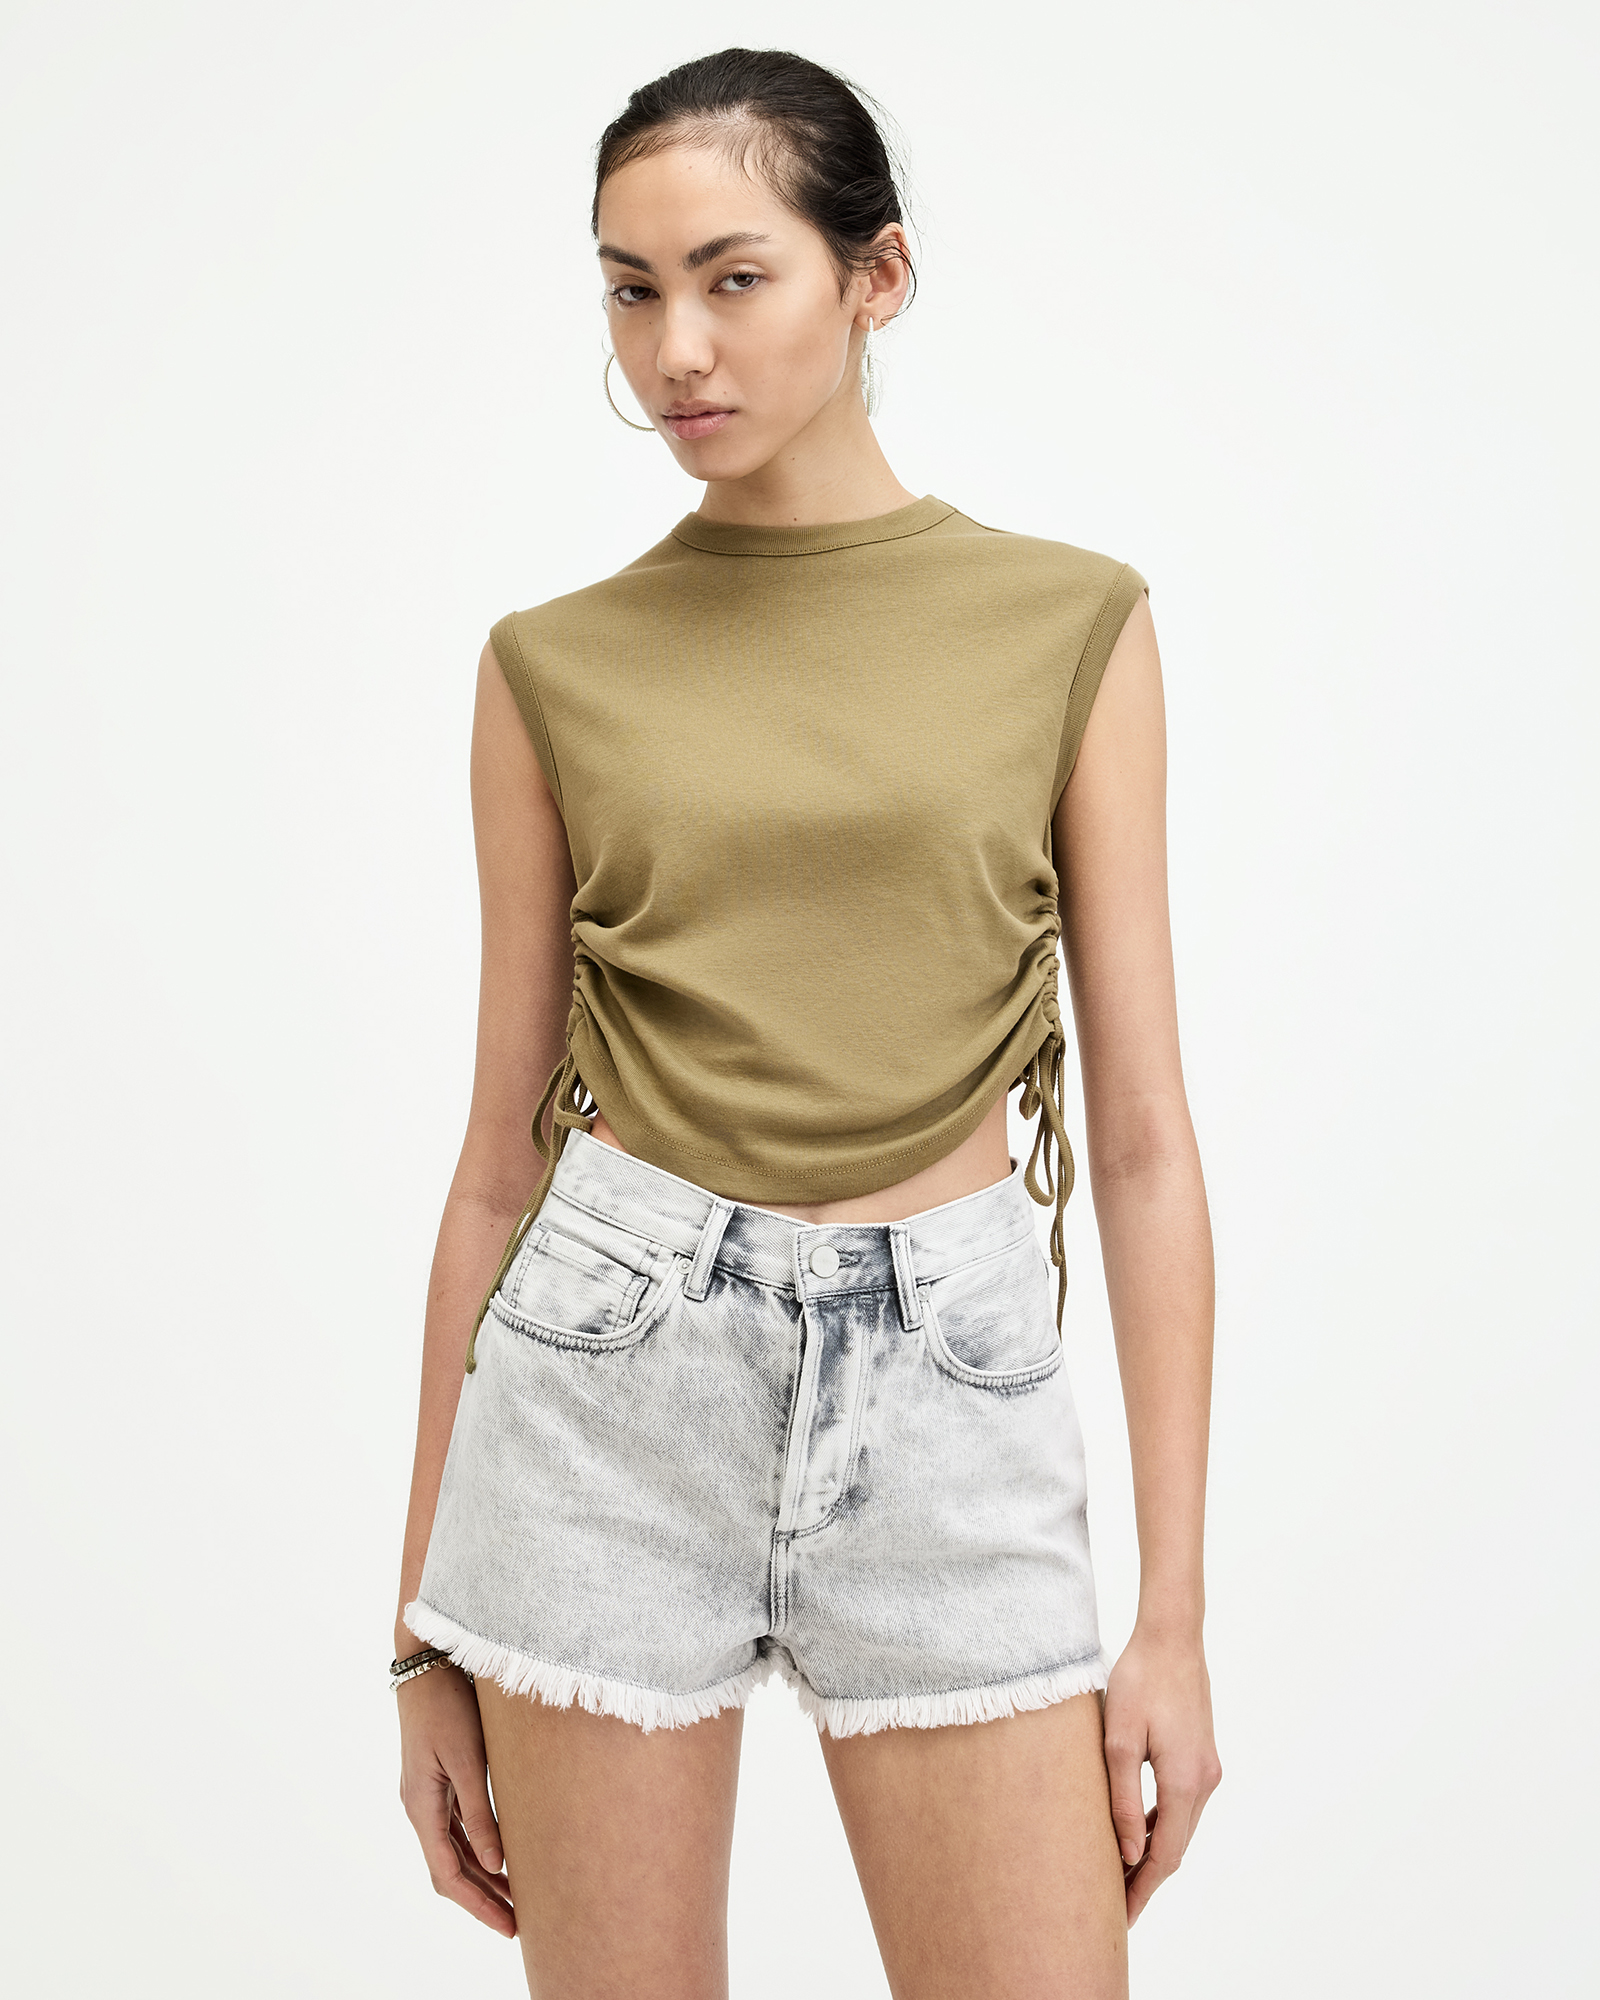 AllSaints Sonny Side Seam Drawcord Tank Top,, Olive Green